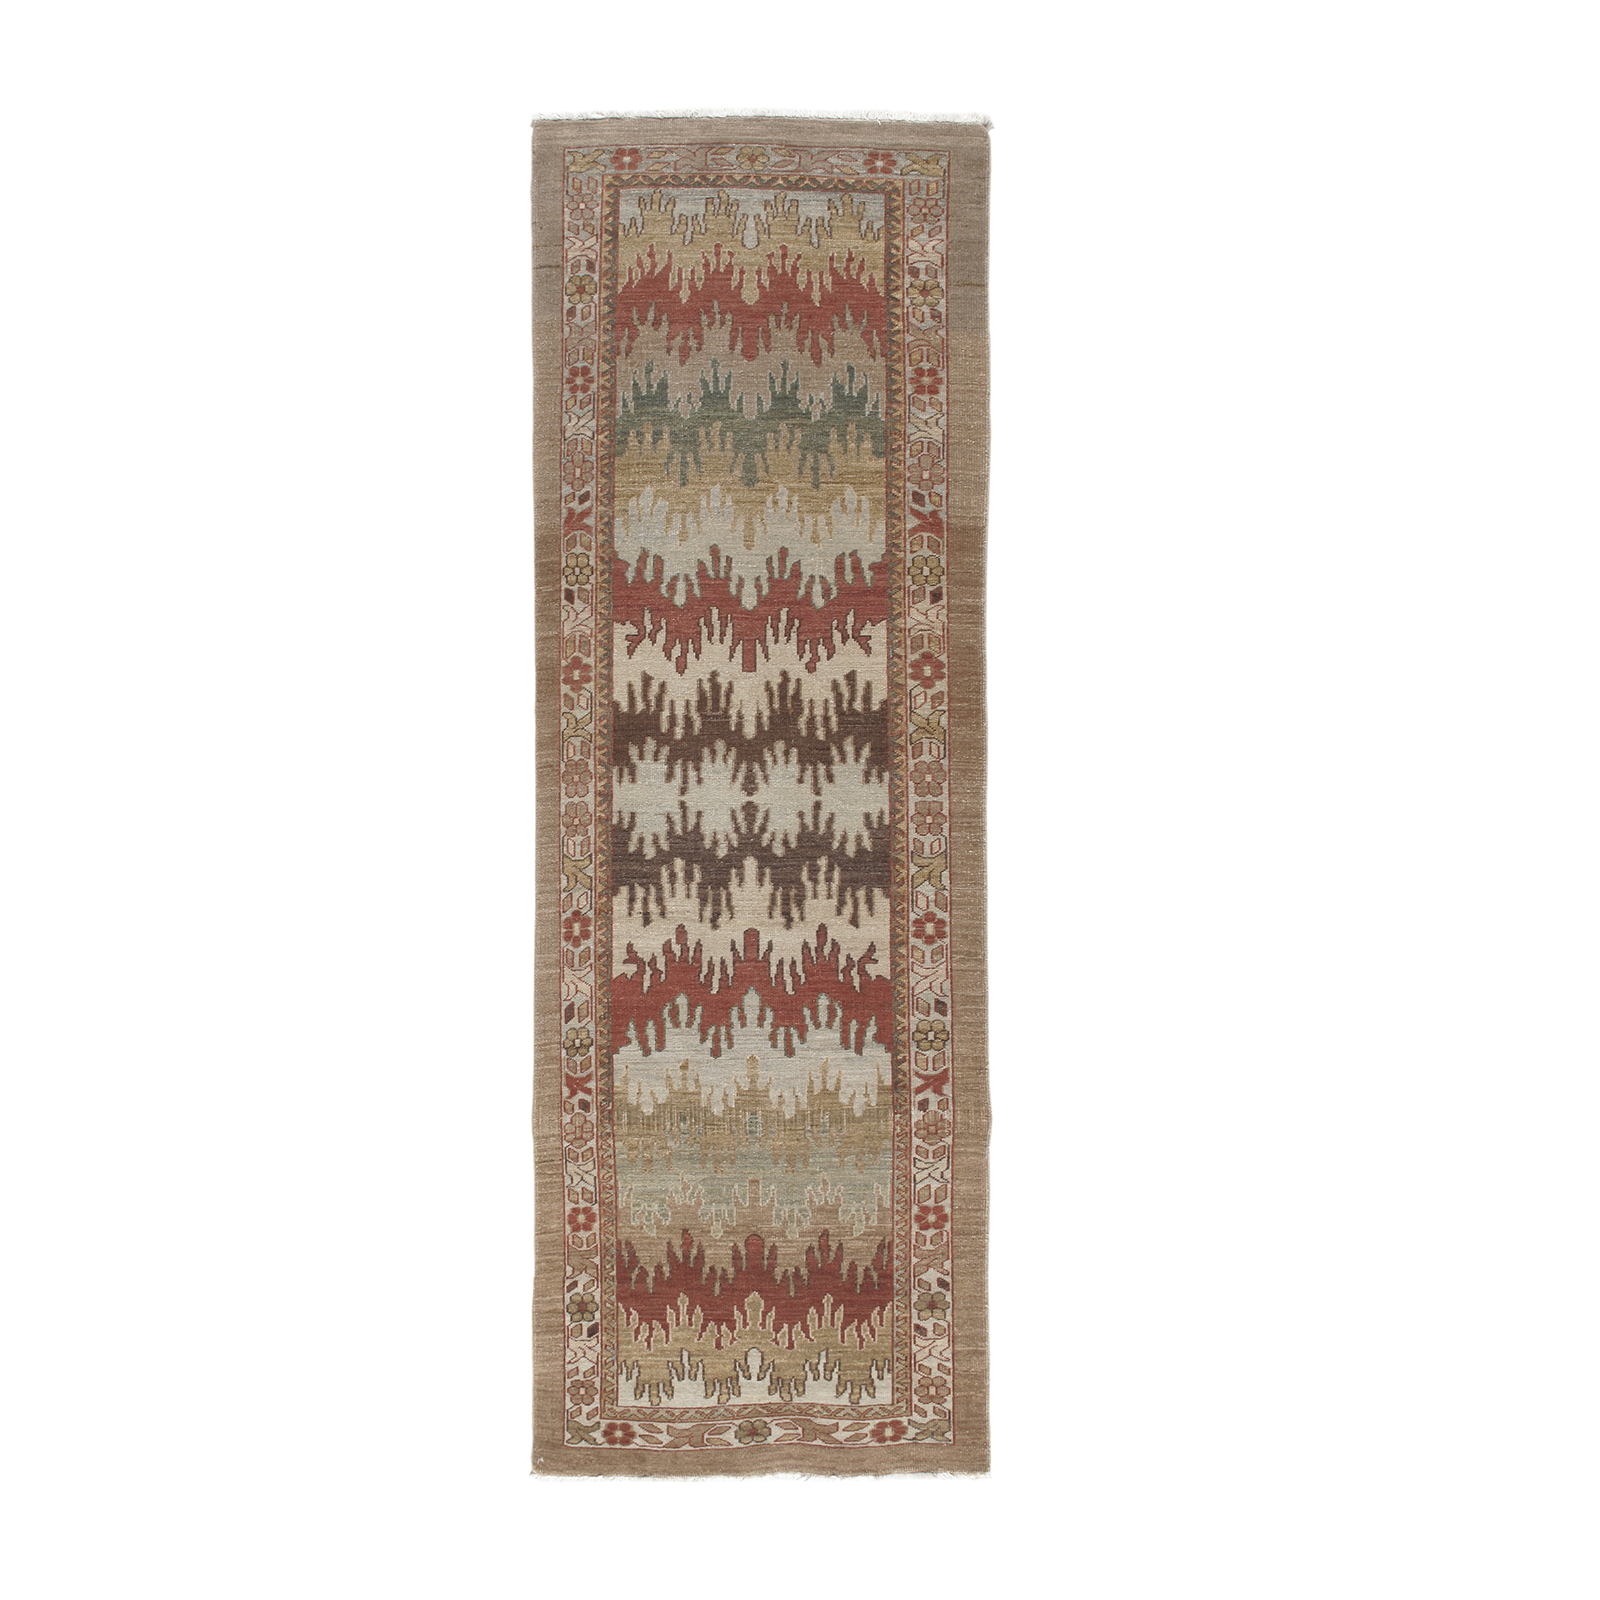 This Bakhshaish Runner is crafted with all natural material. 